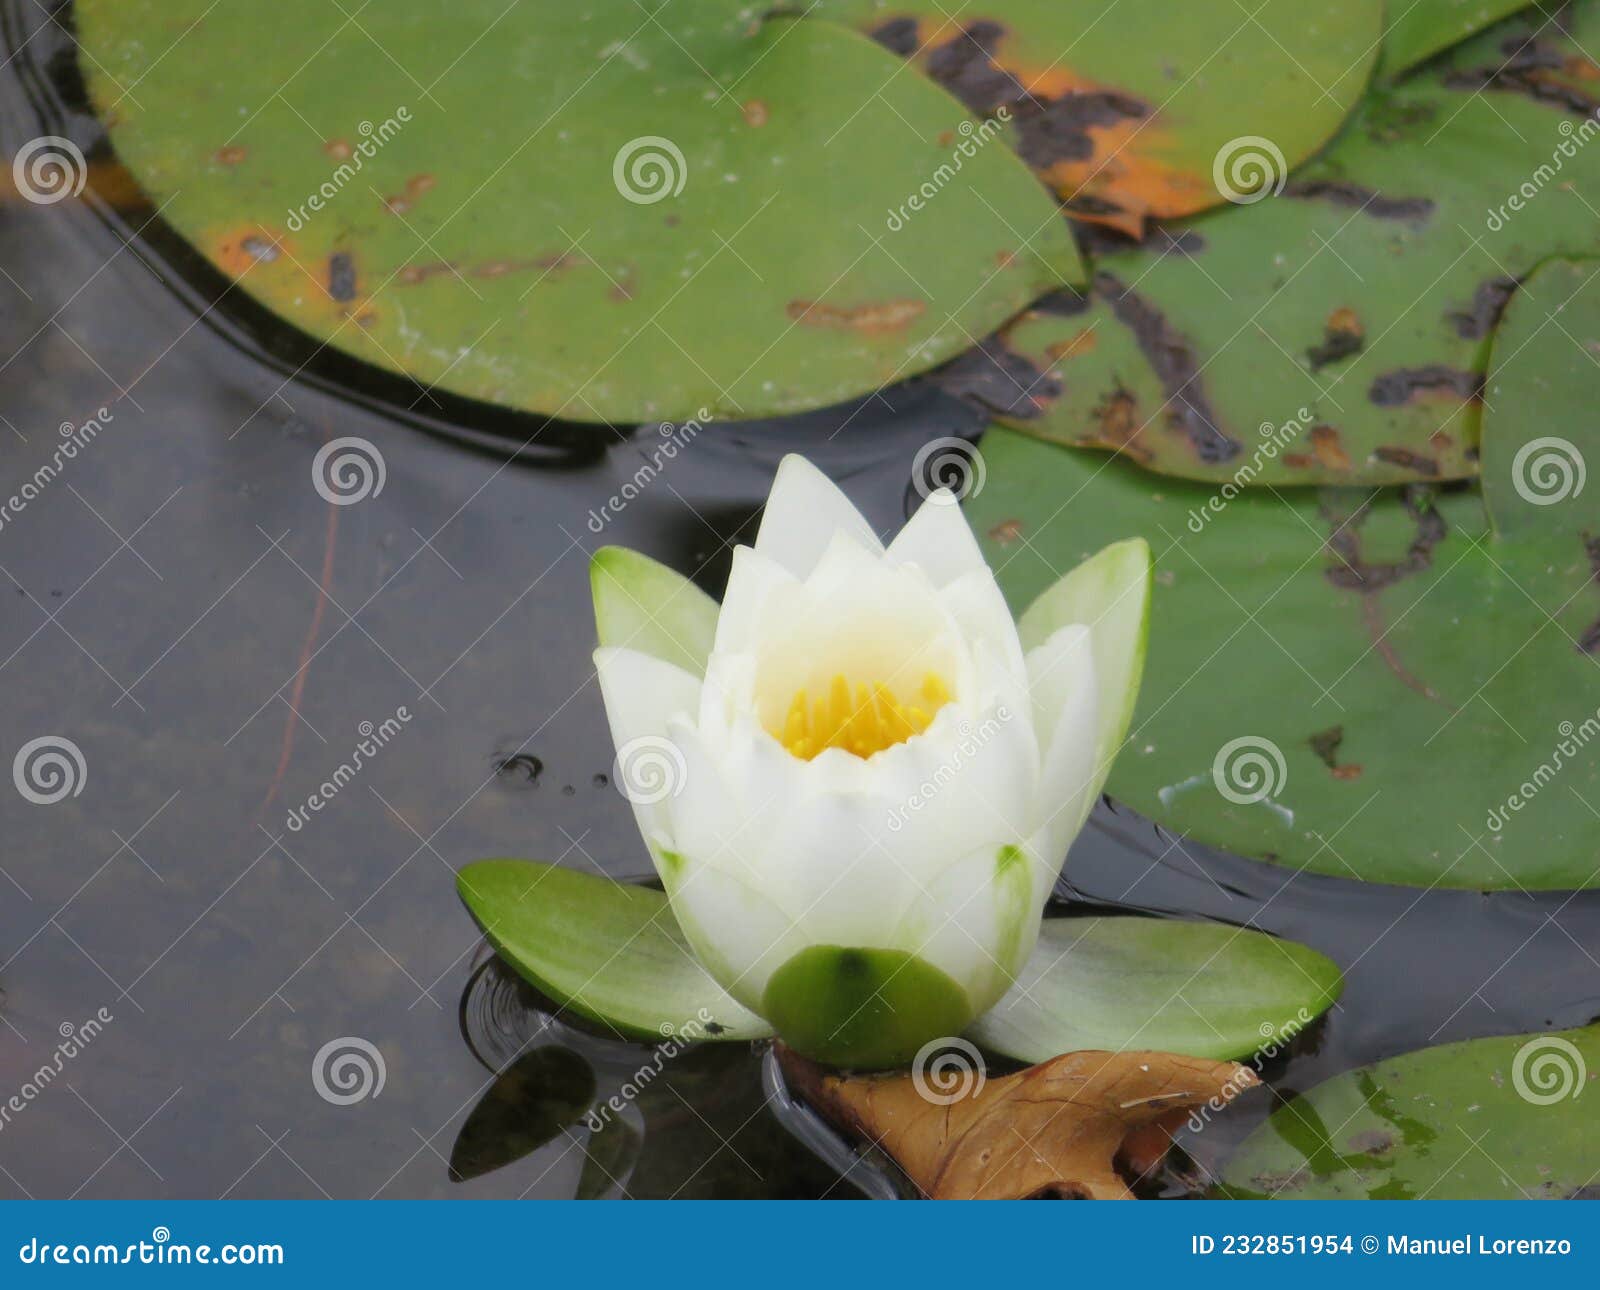 life in the lake water lily water flower plants